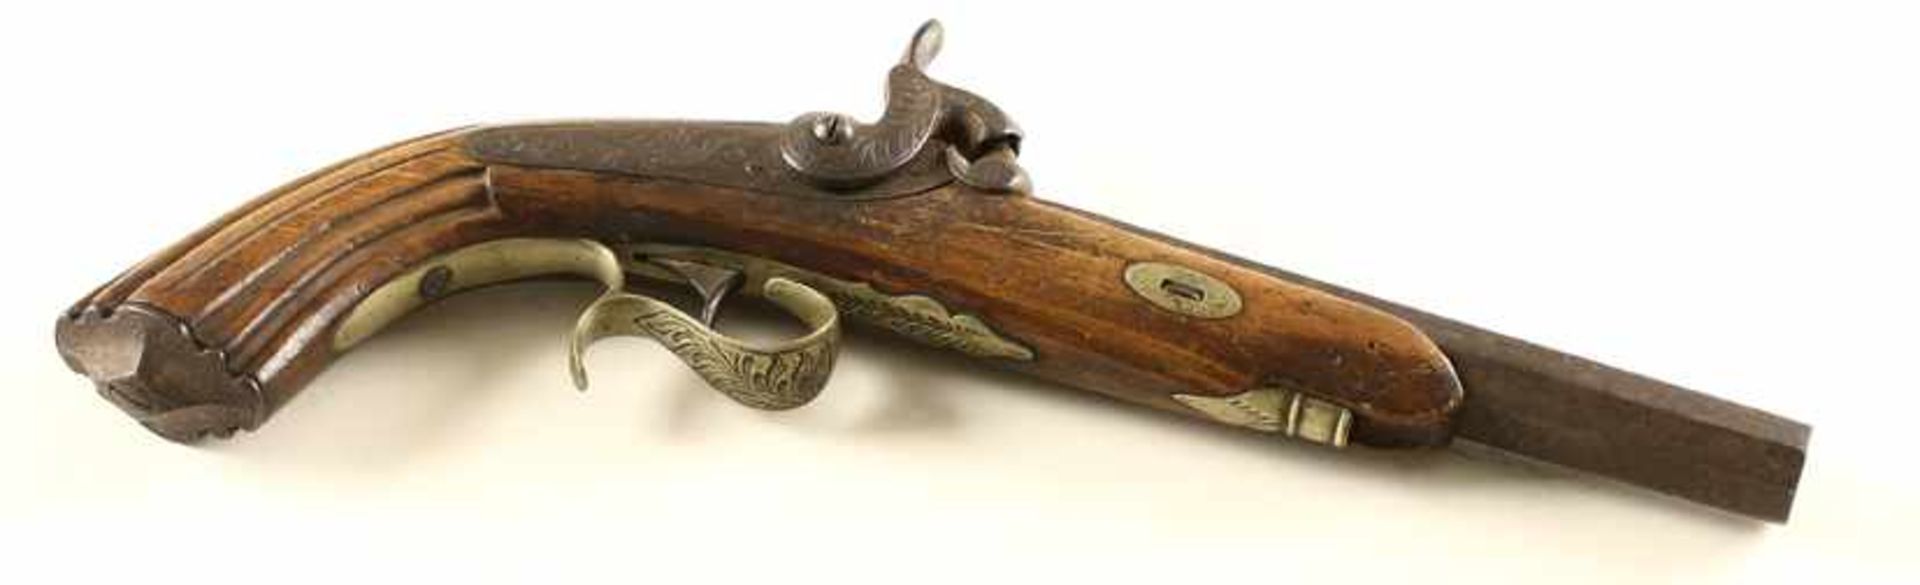 Percussion pistol, no maker markings, some cracks in wood, metal slightly rusted, ramrod missing,